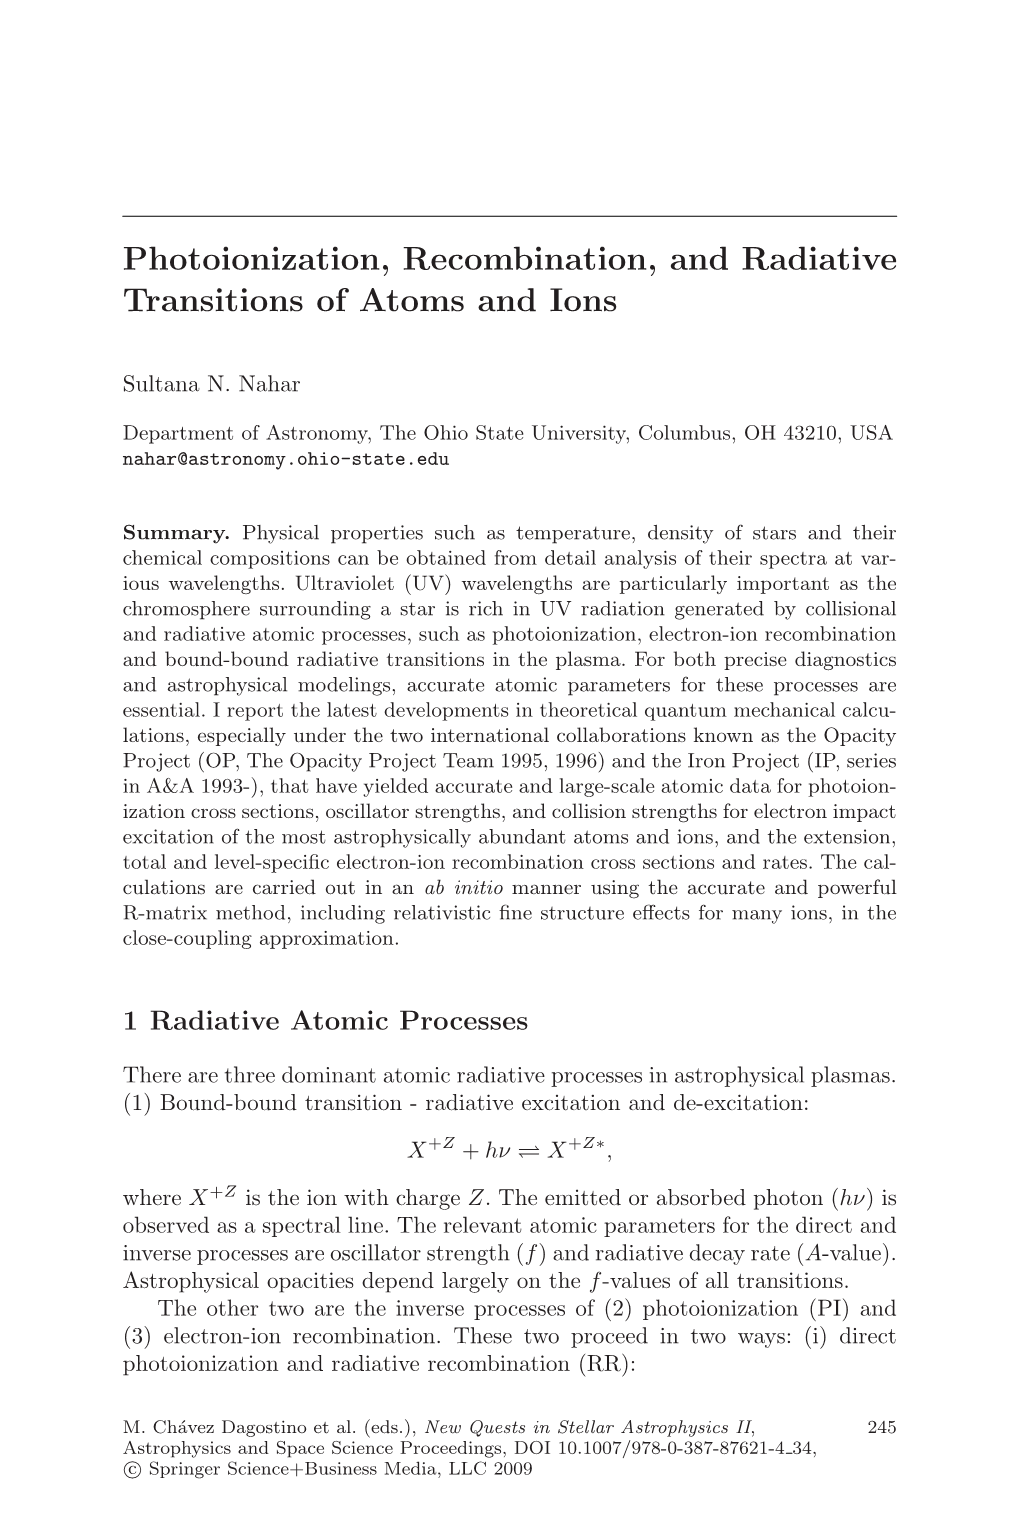 Photoionization, Recombination, and Radiative Transitions of Atoms and Ions